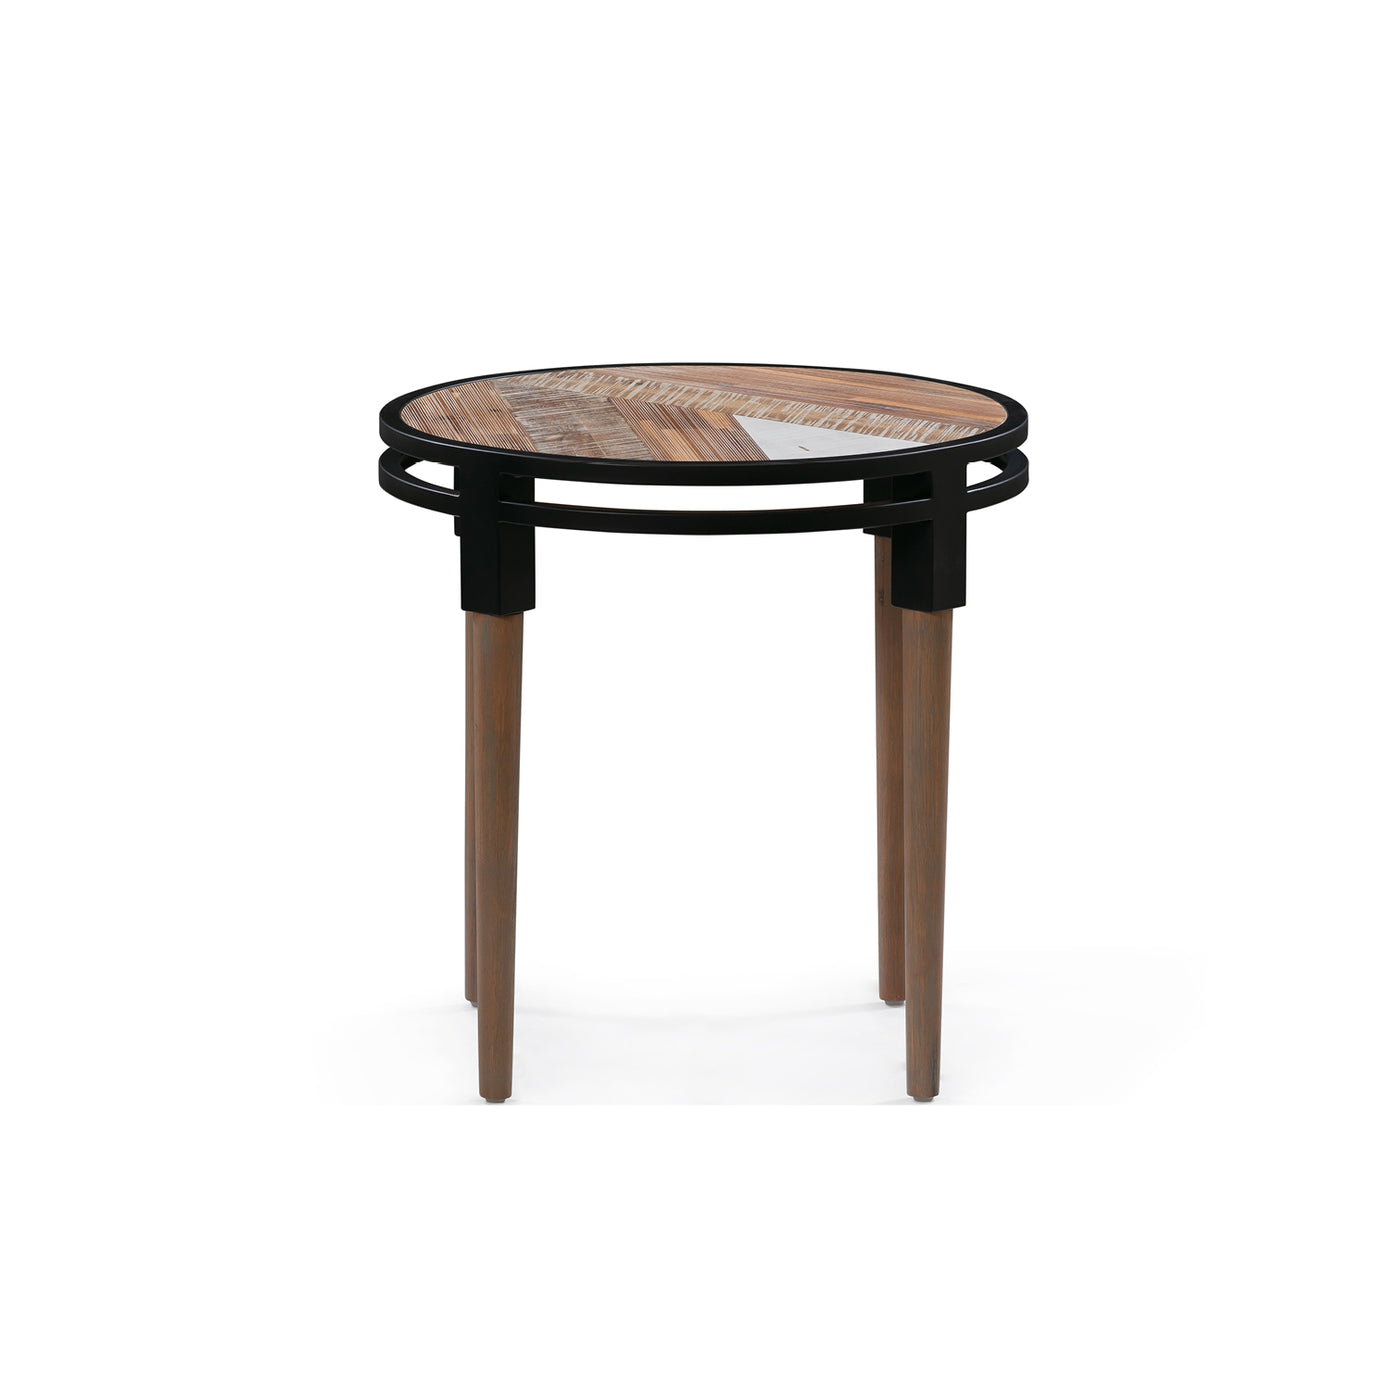 Medley End Table in Multi-Tone Natural Finish